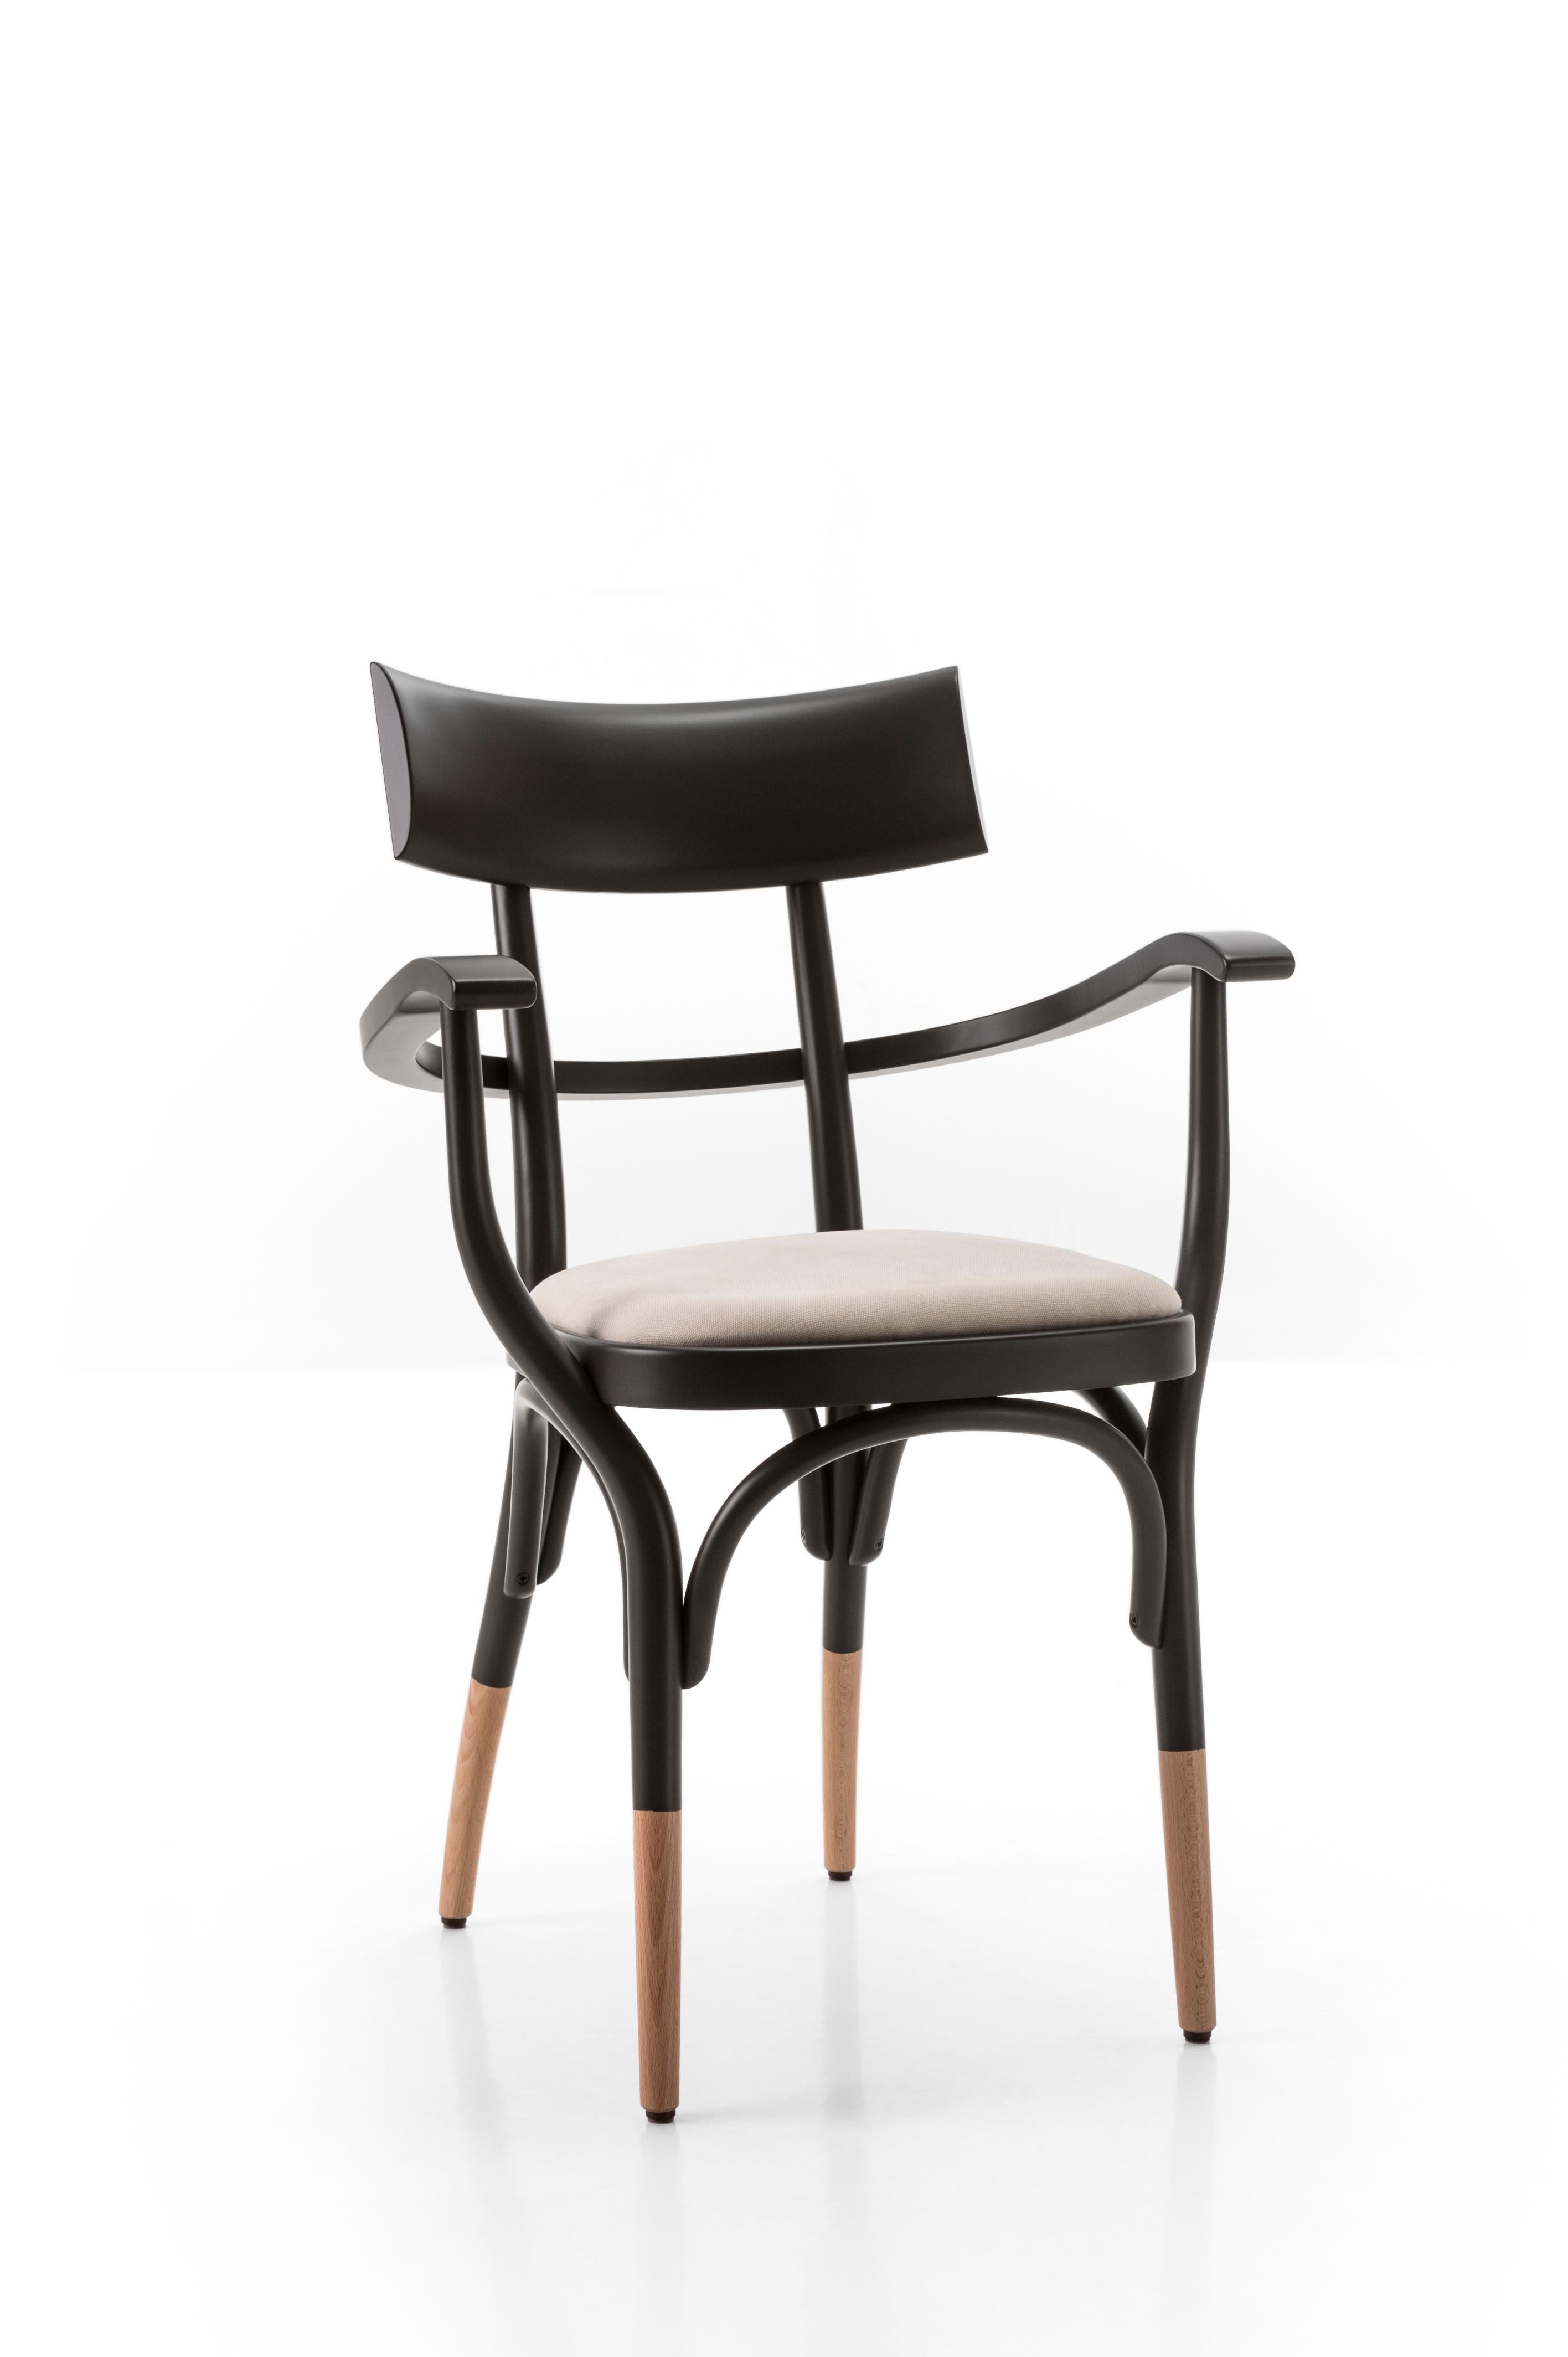 Designed in 1994, the Hermann Czech chair represents the turning point of modern furniture towards the passion of reminiscence and intimacy: a contemporary design that evokes memories of times gone by. An ideal way of maintaining continuity with the